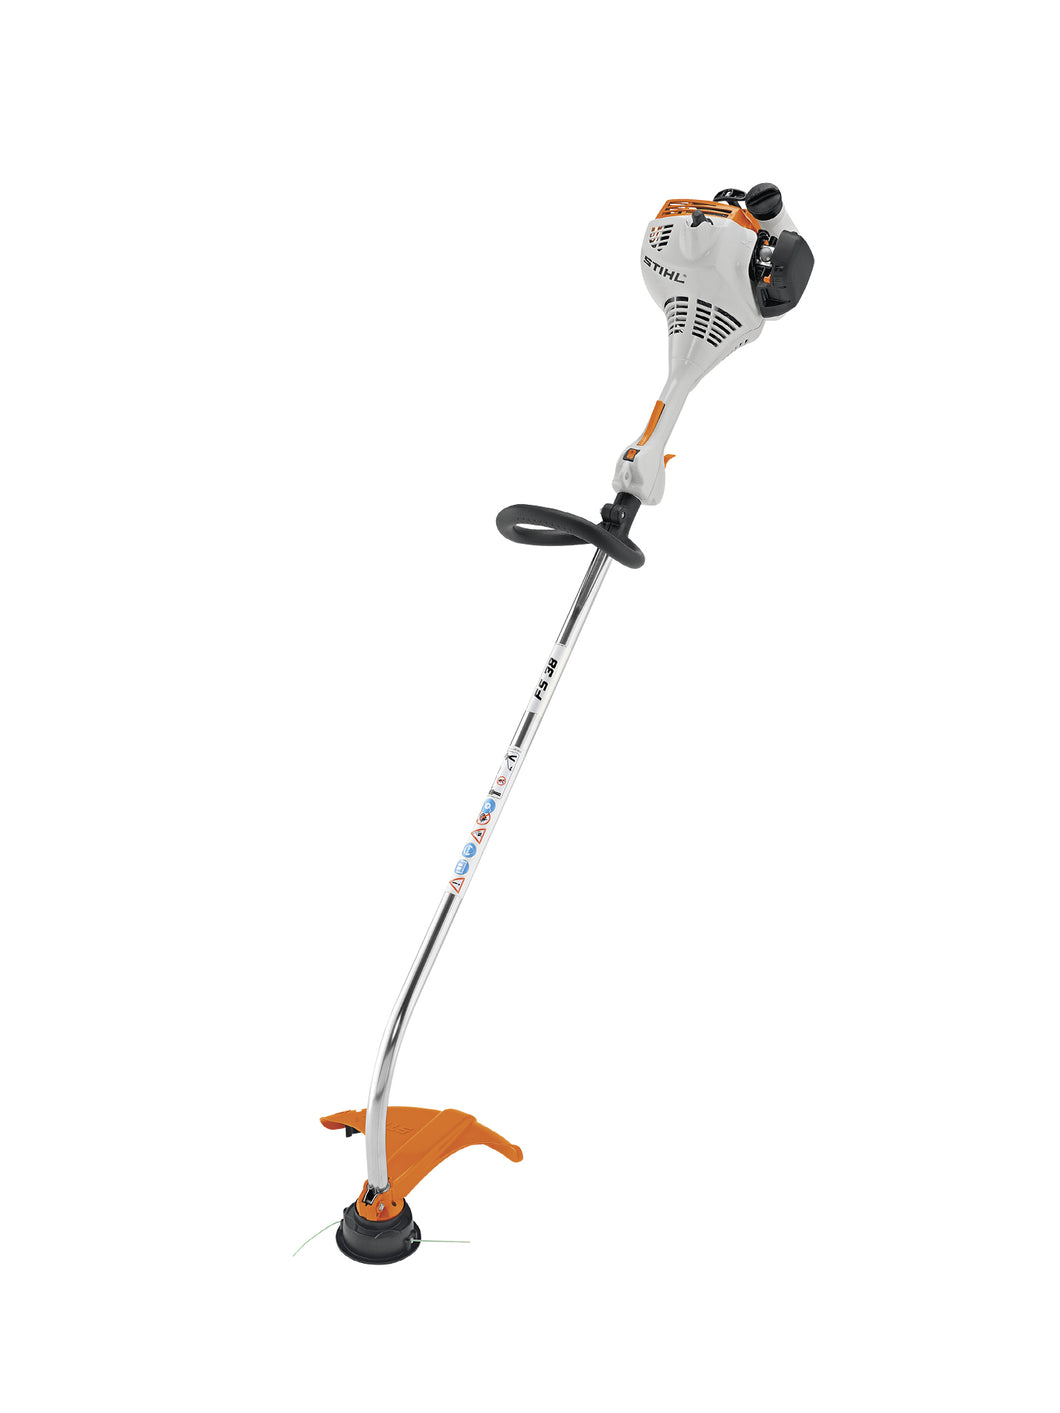 Stihl FS 38 - The Home Of Fire